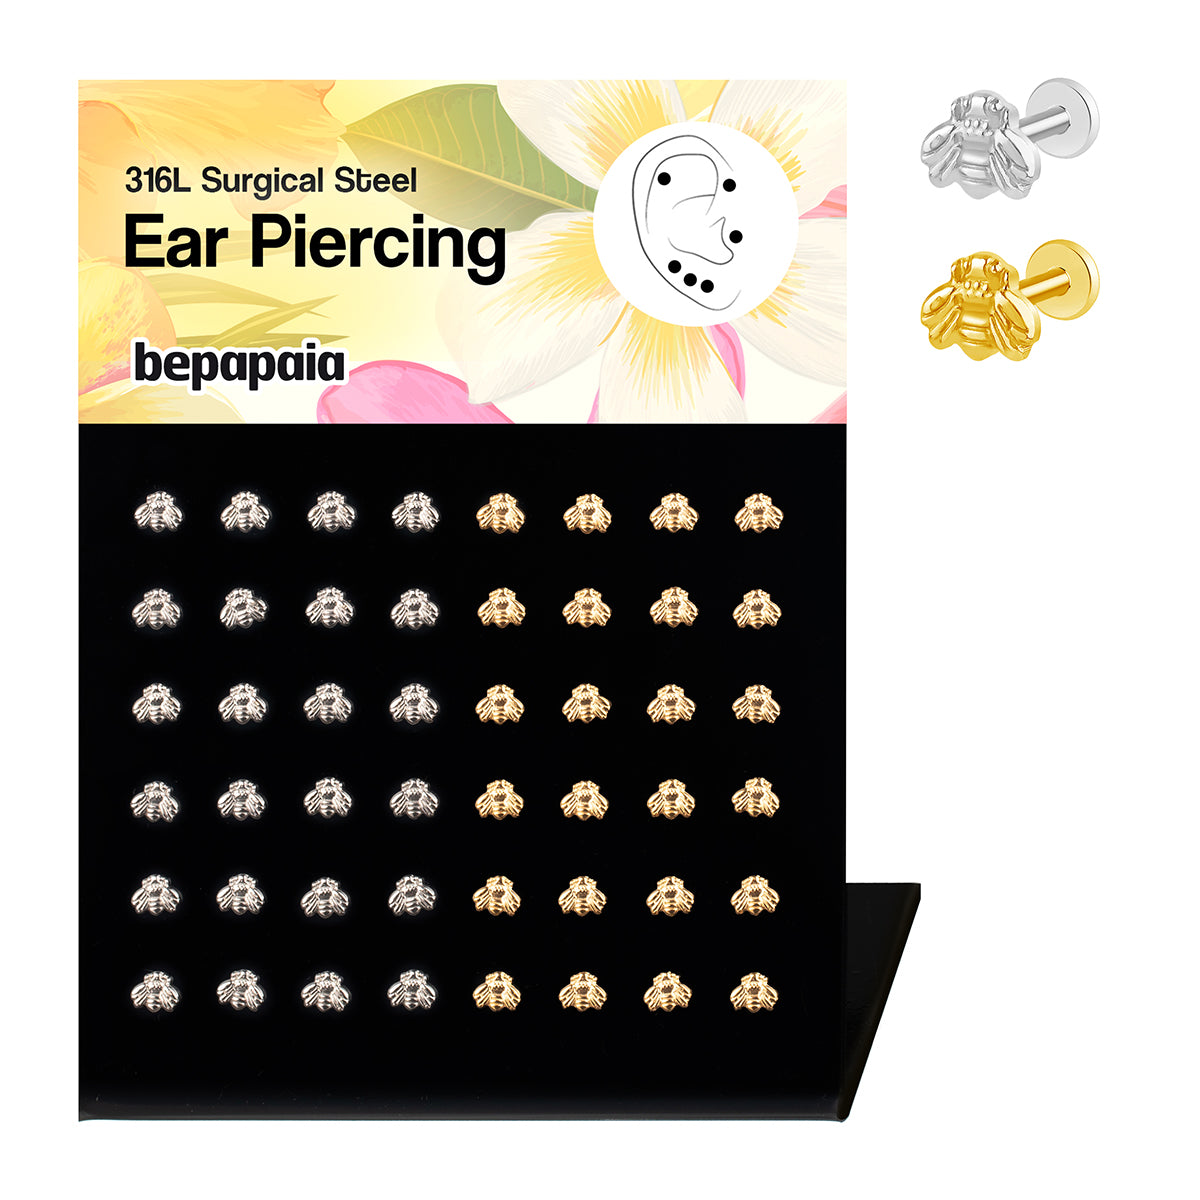 Ear piercing with bee